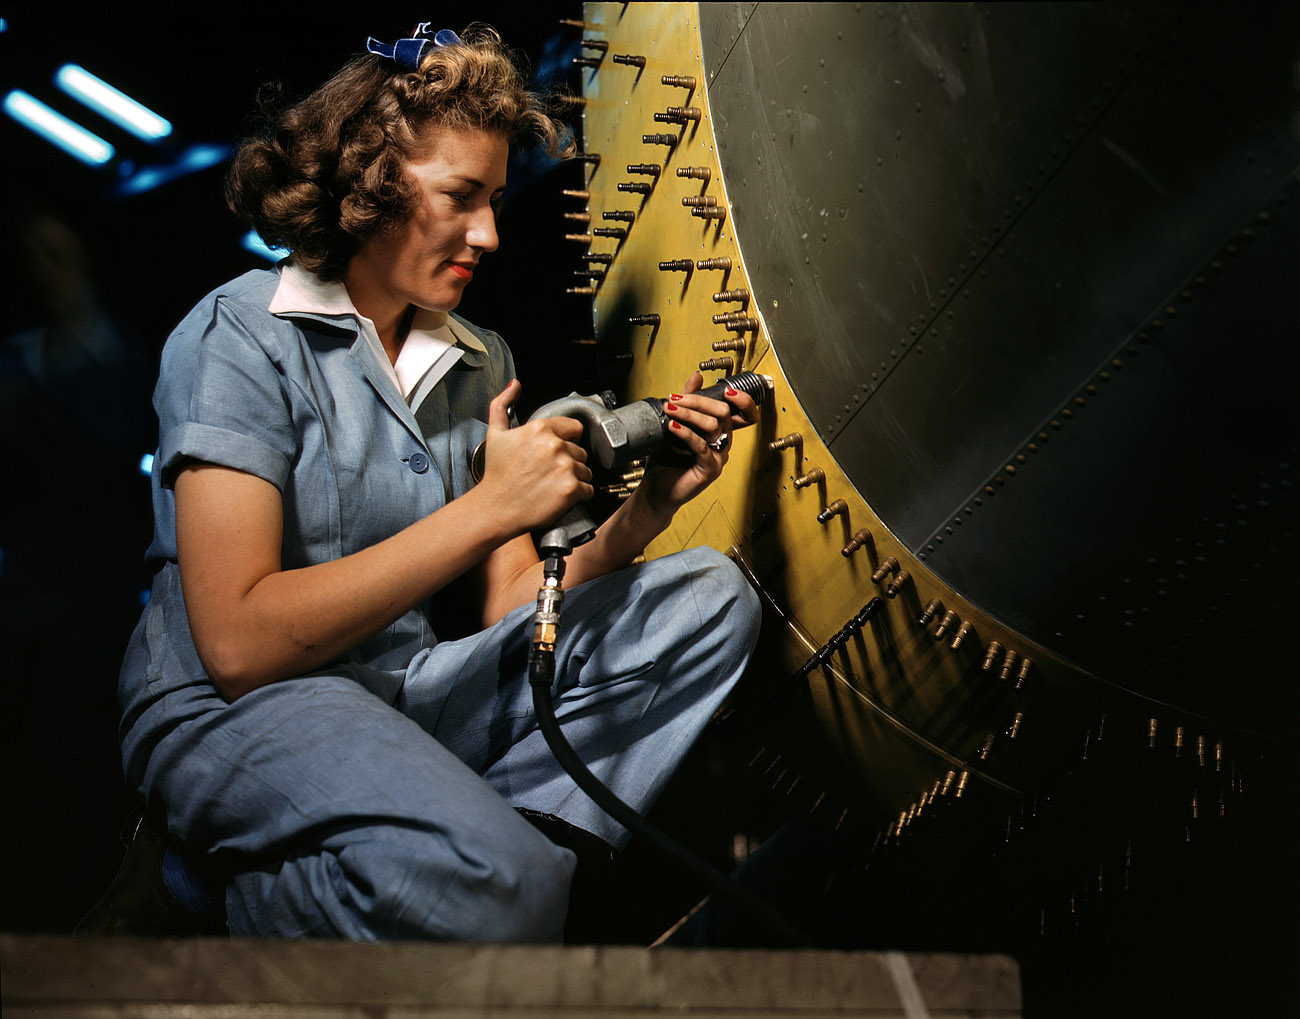 October 1942. Riveter at work on a bomber at the Consolidated Aircraft factory in Fort Worth. View full size. 4x5 Kodachrome transparency by Howard Hollem.